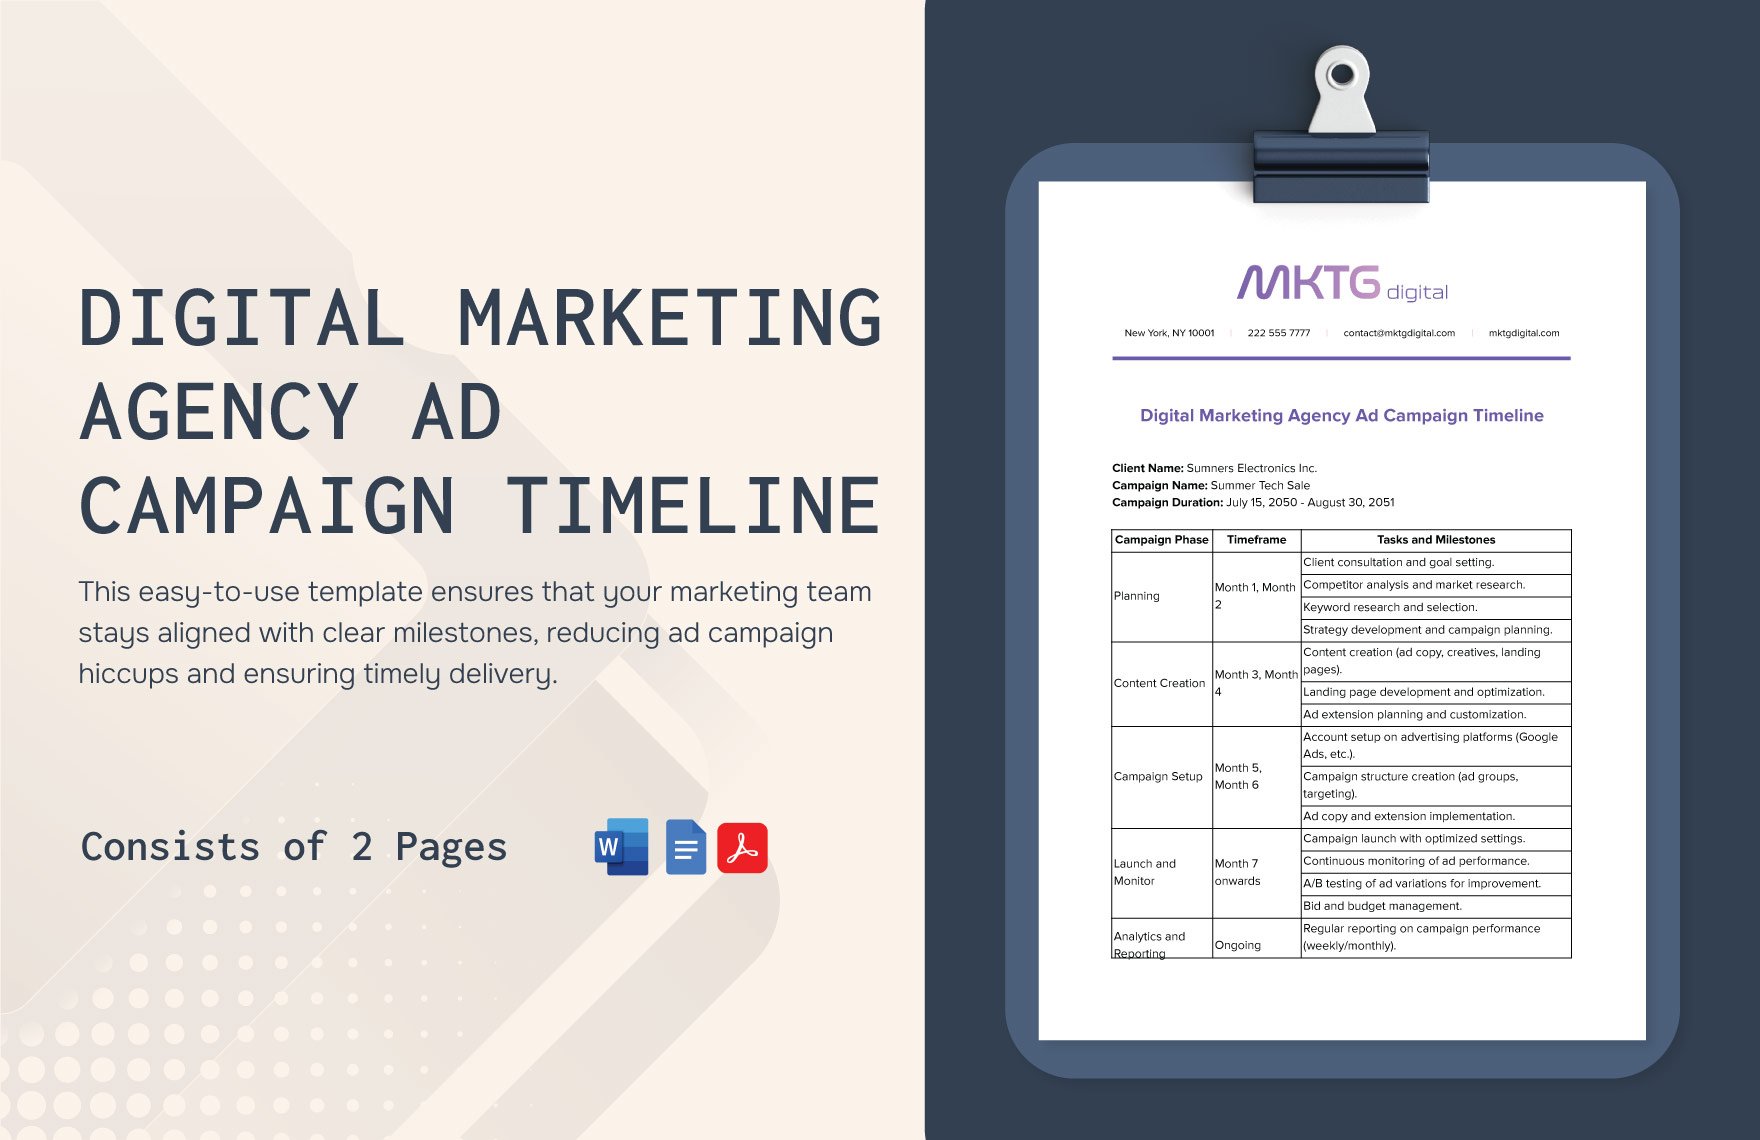 Digital Marketing Agency Ad Campaign Timeline Template in Word, Google Docs, PDF